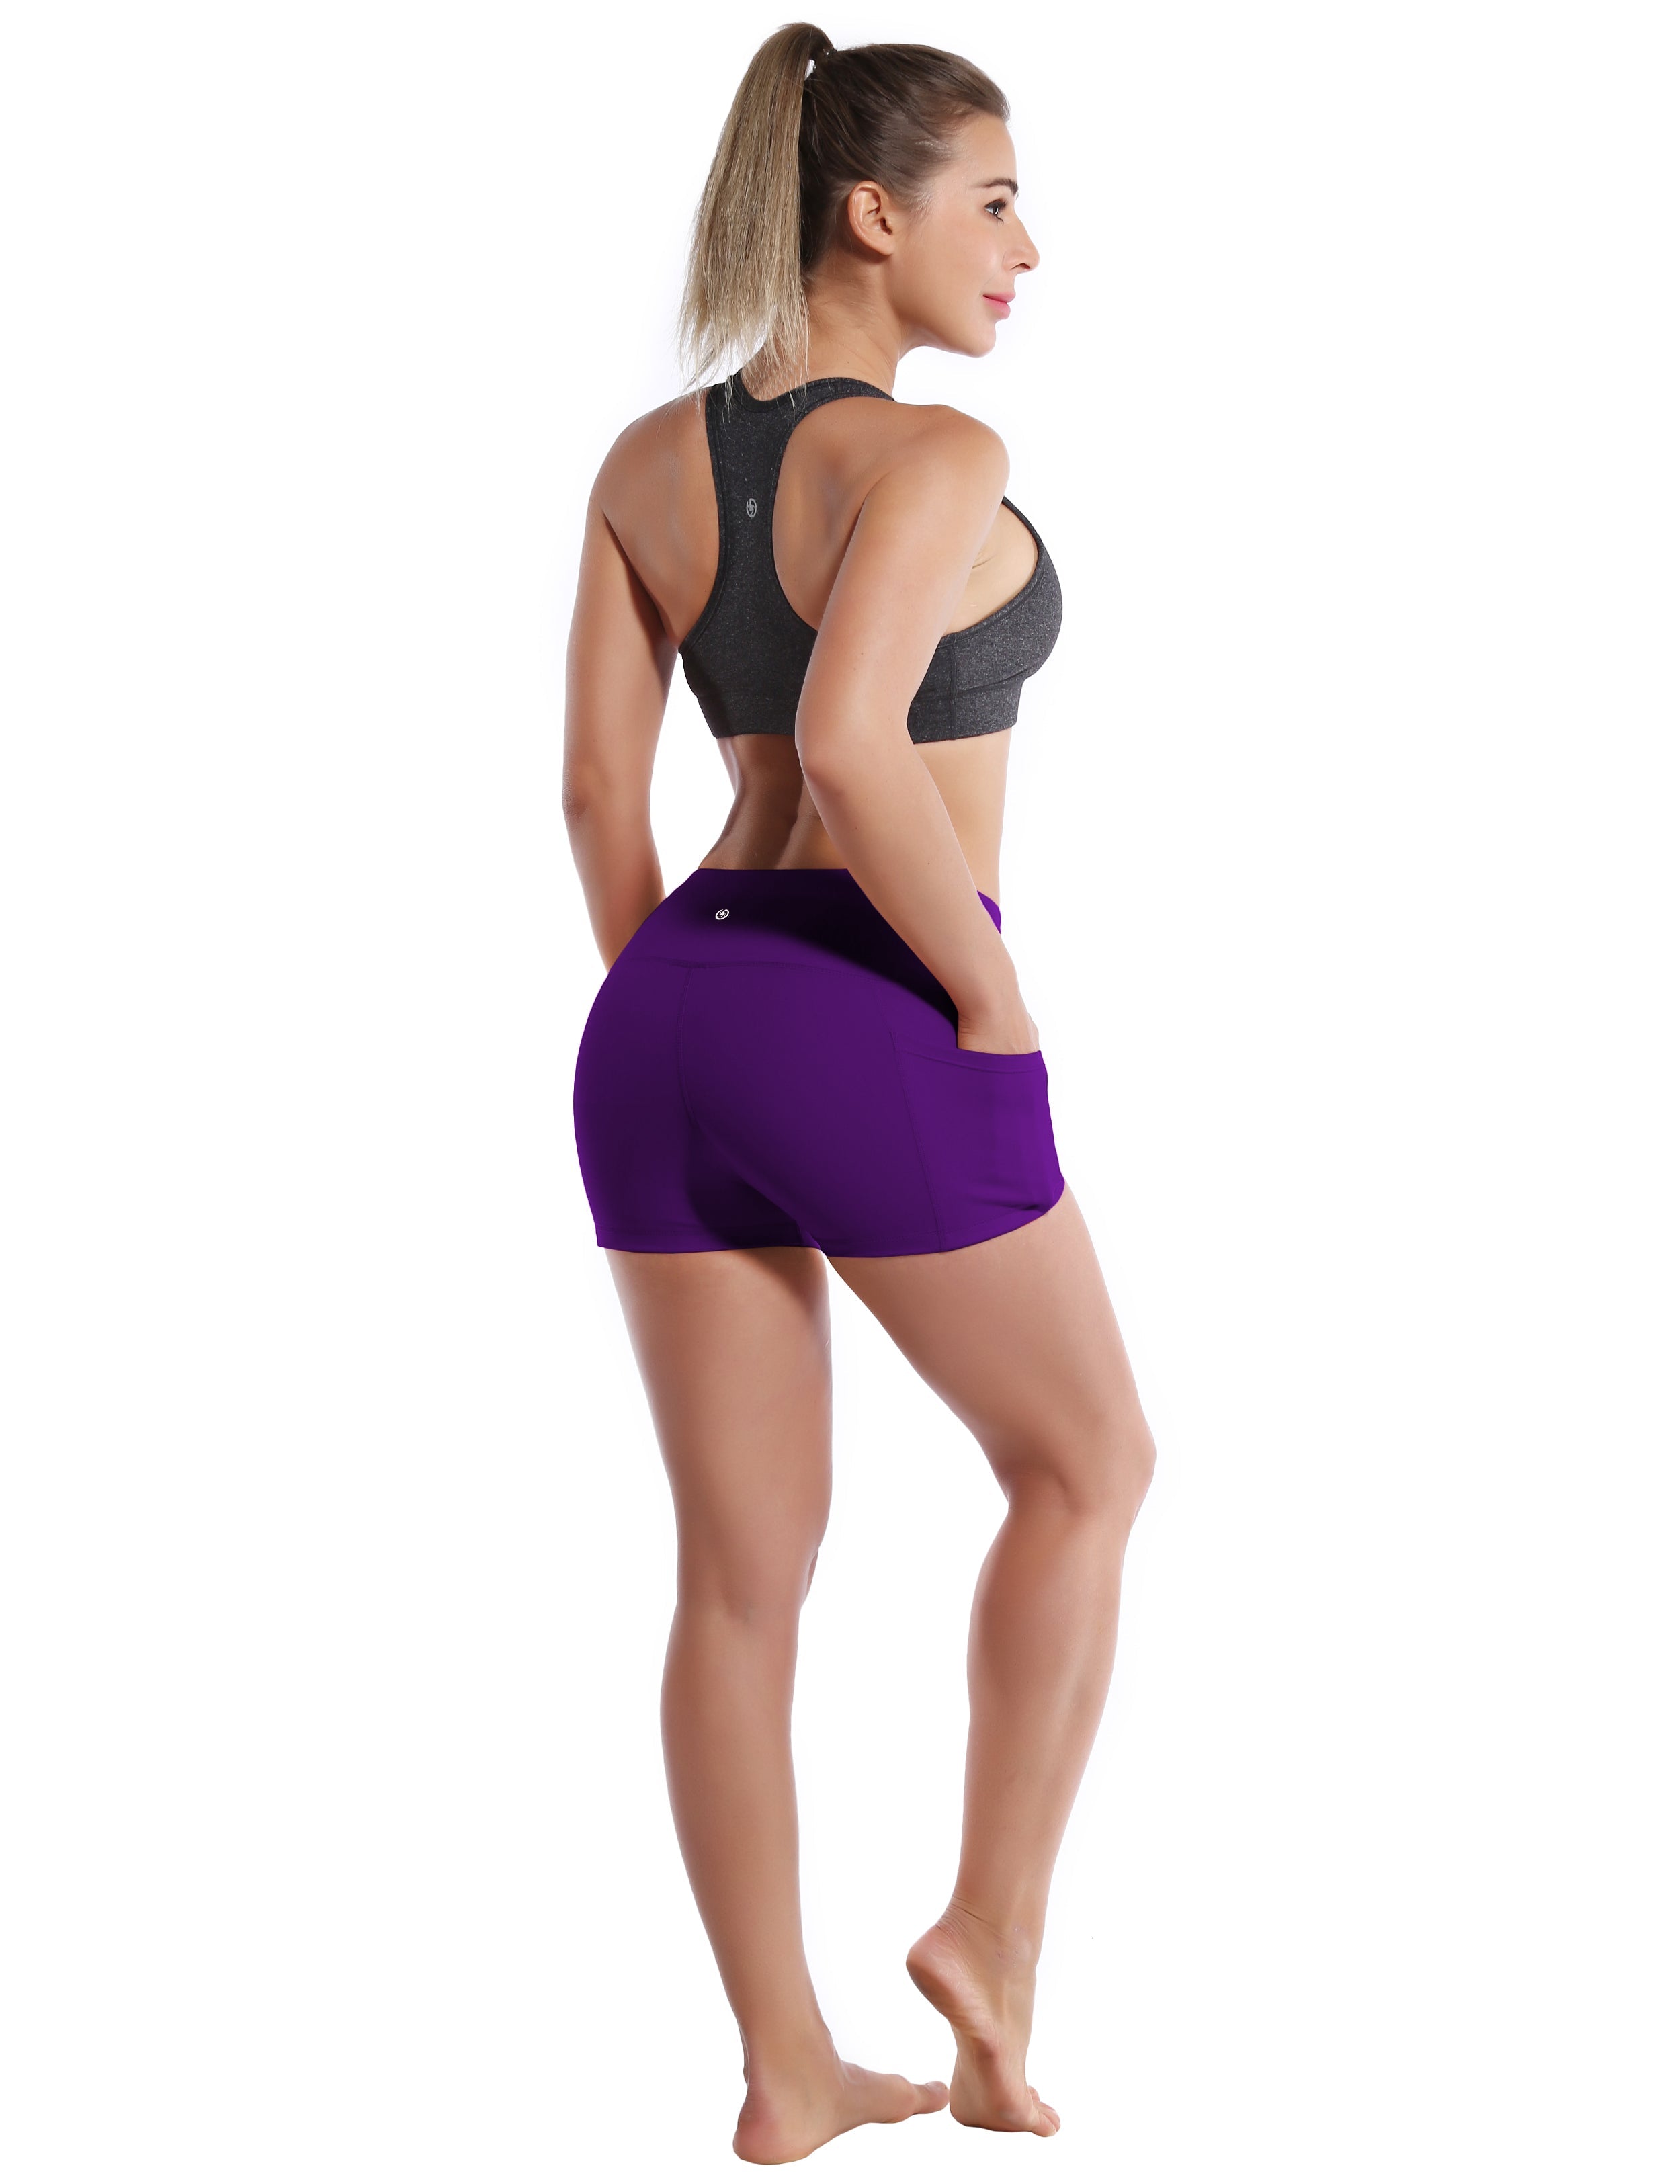 2.5" Side Pockets Golf Shorts eggplantpurple Sleek, soft, smooth and totally comfortable: our newest sexy style is here. Softest-ever fabric High elasticity High density 4-way stretch Fabric doesn't attract lint easily No see-through Moisture-wicking Machine wash 78% Polyester, 22% Spandex